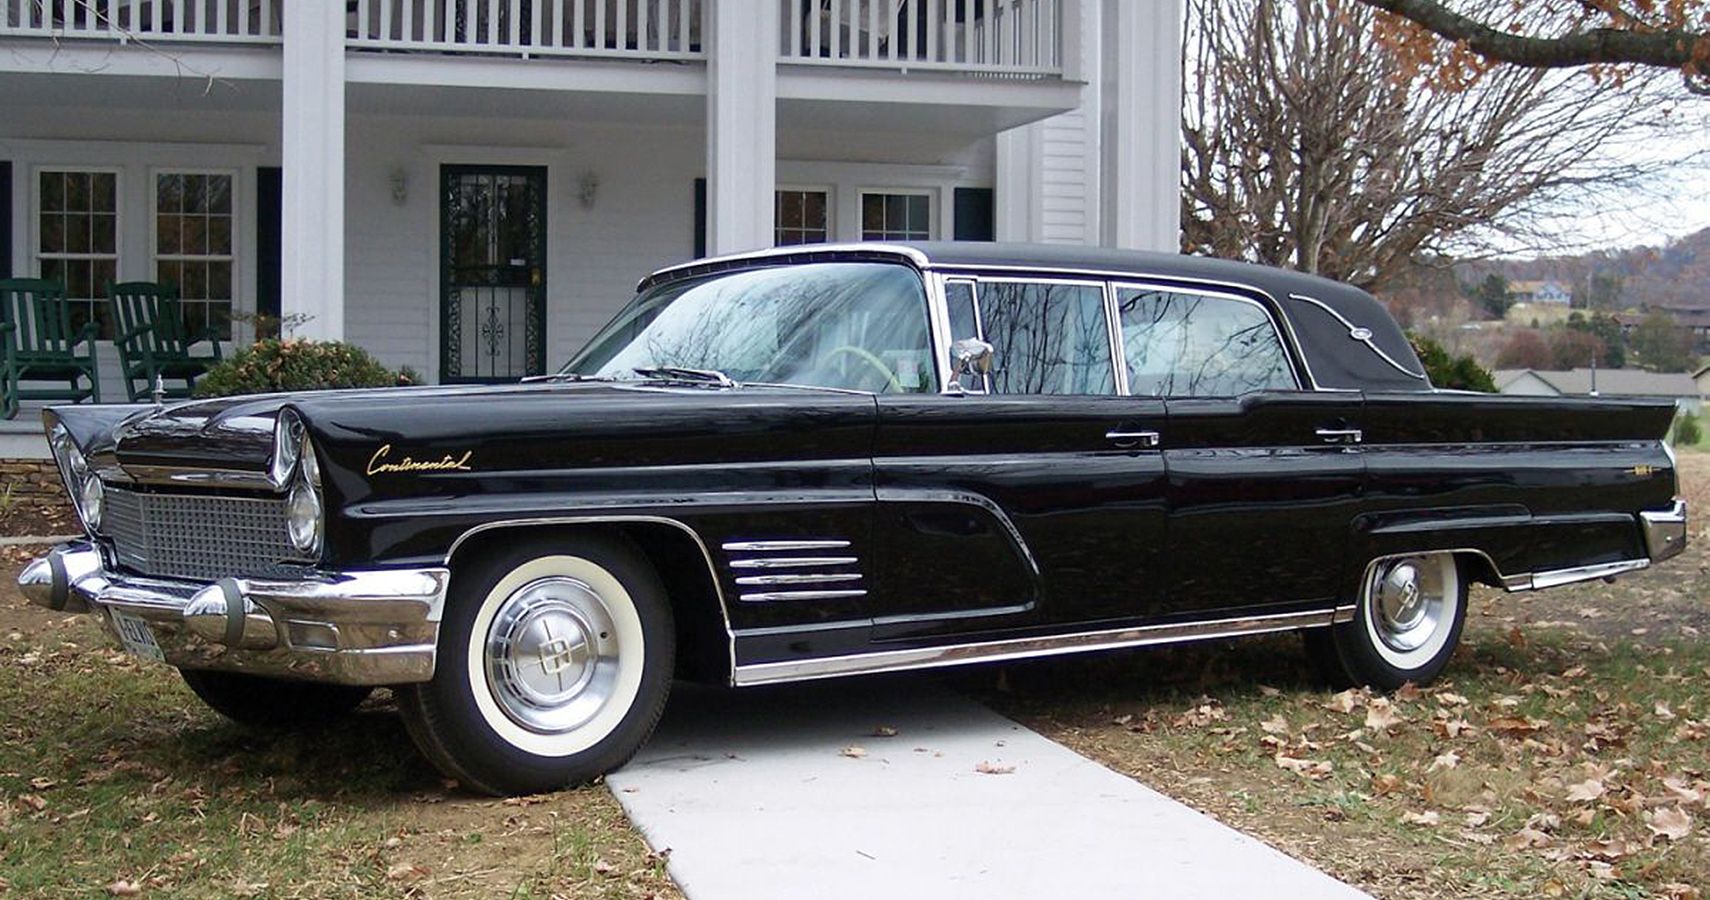 1960 Lincoln Continental Mark V: To Be Chauffeured Behind Enemy Lines